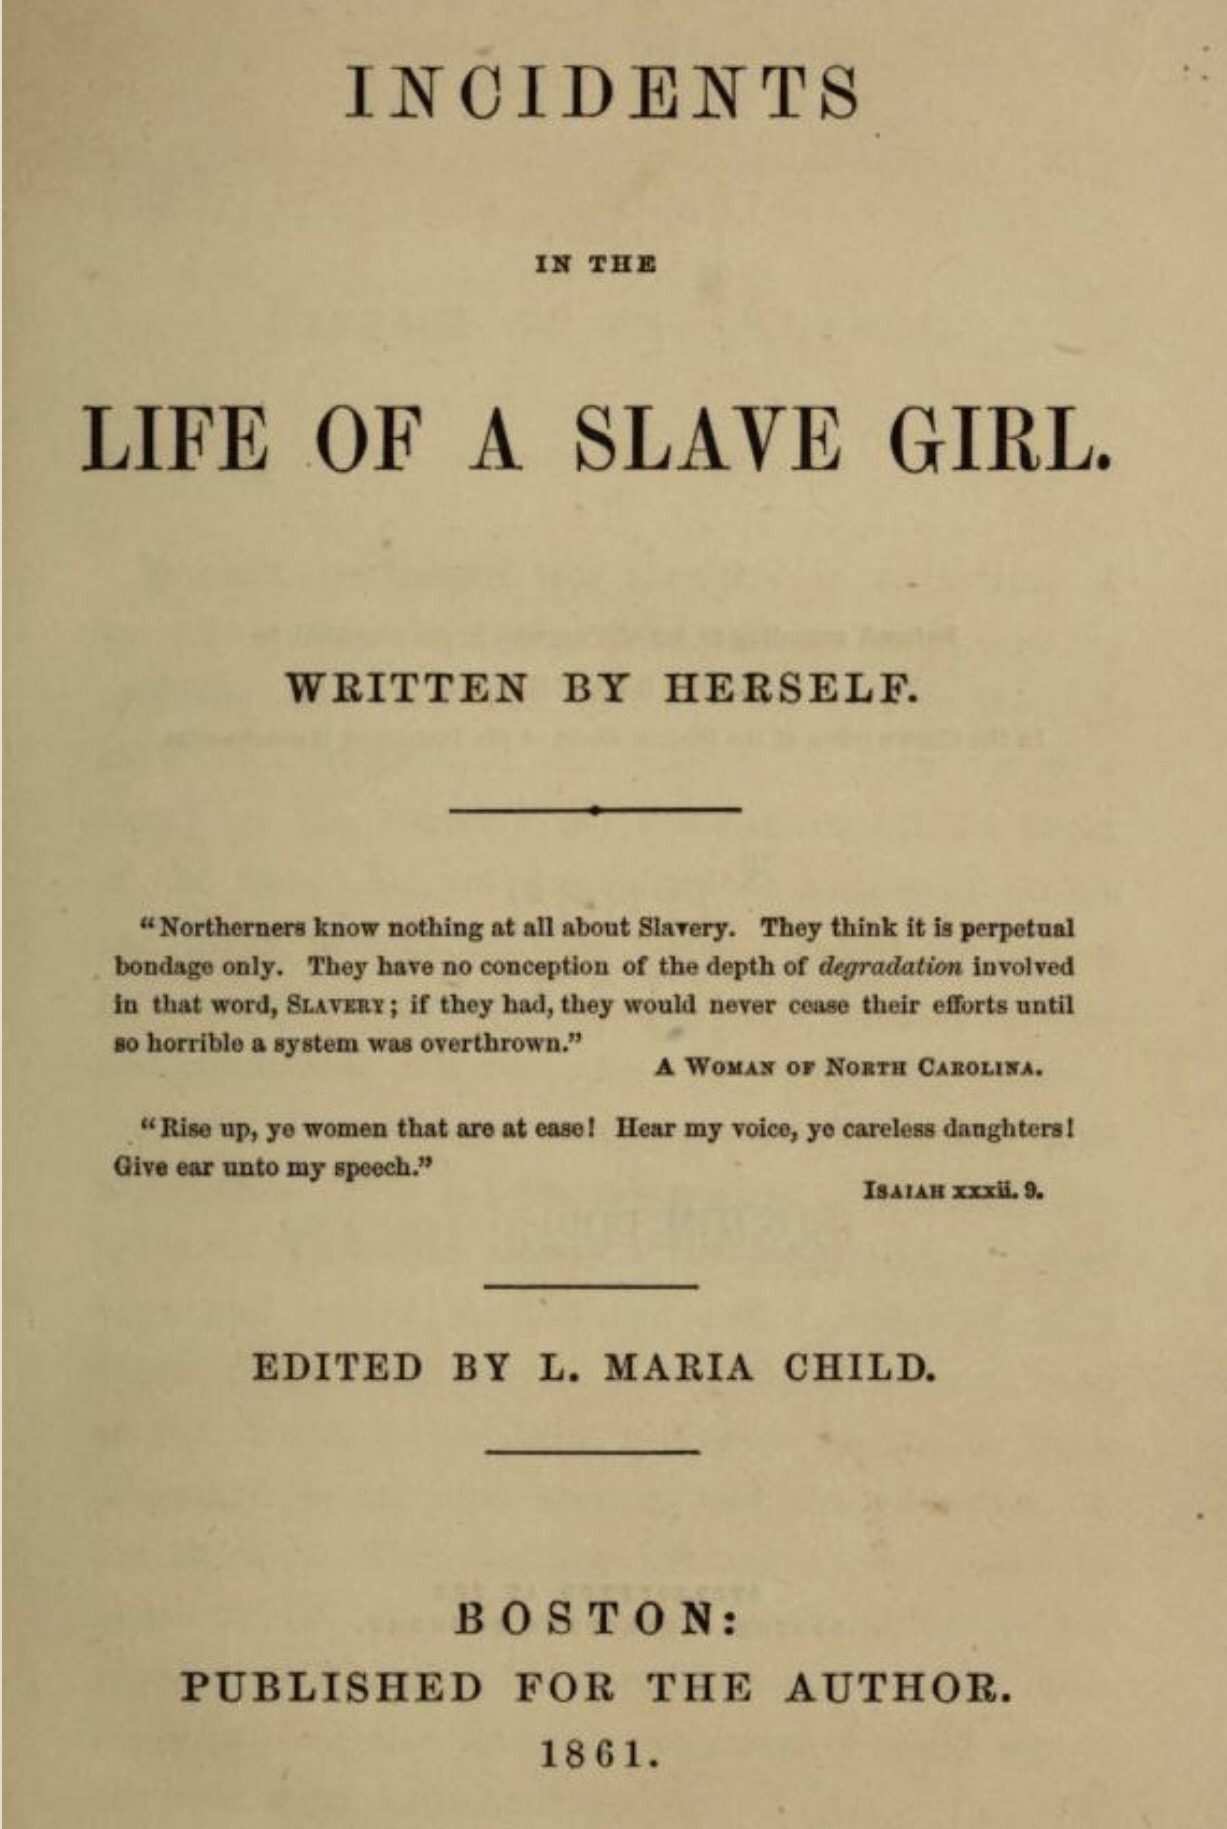 The original book copy of Incidents in the Life of a Slave Girl